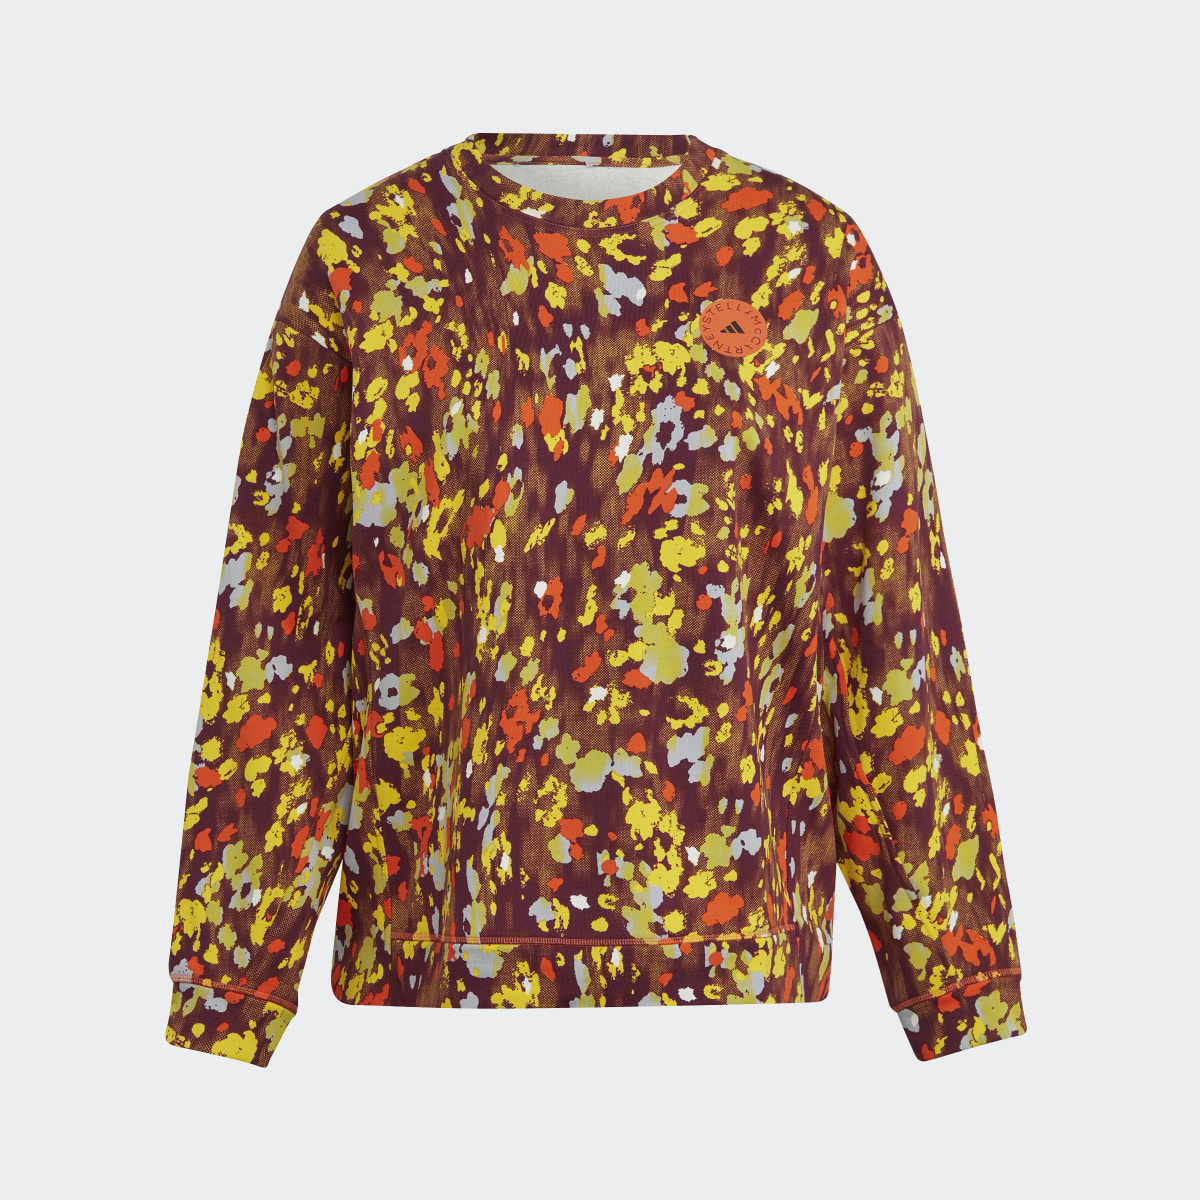 Adidas Sweat-shirt graphique adidas by Stella McCartney (Grandes tailles). 4